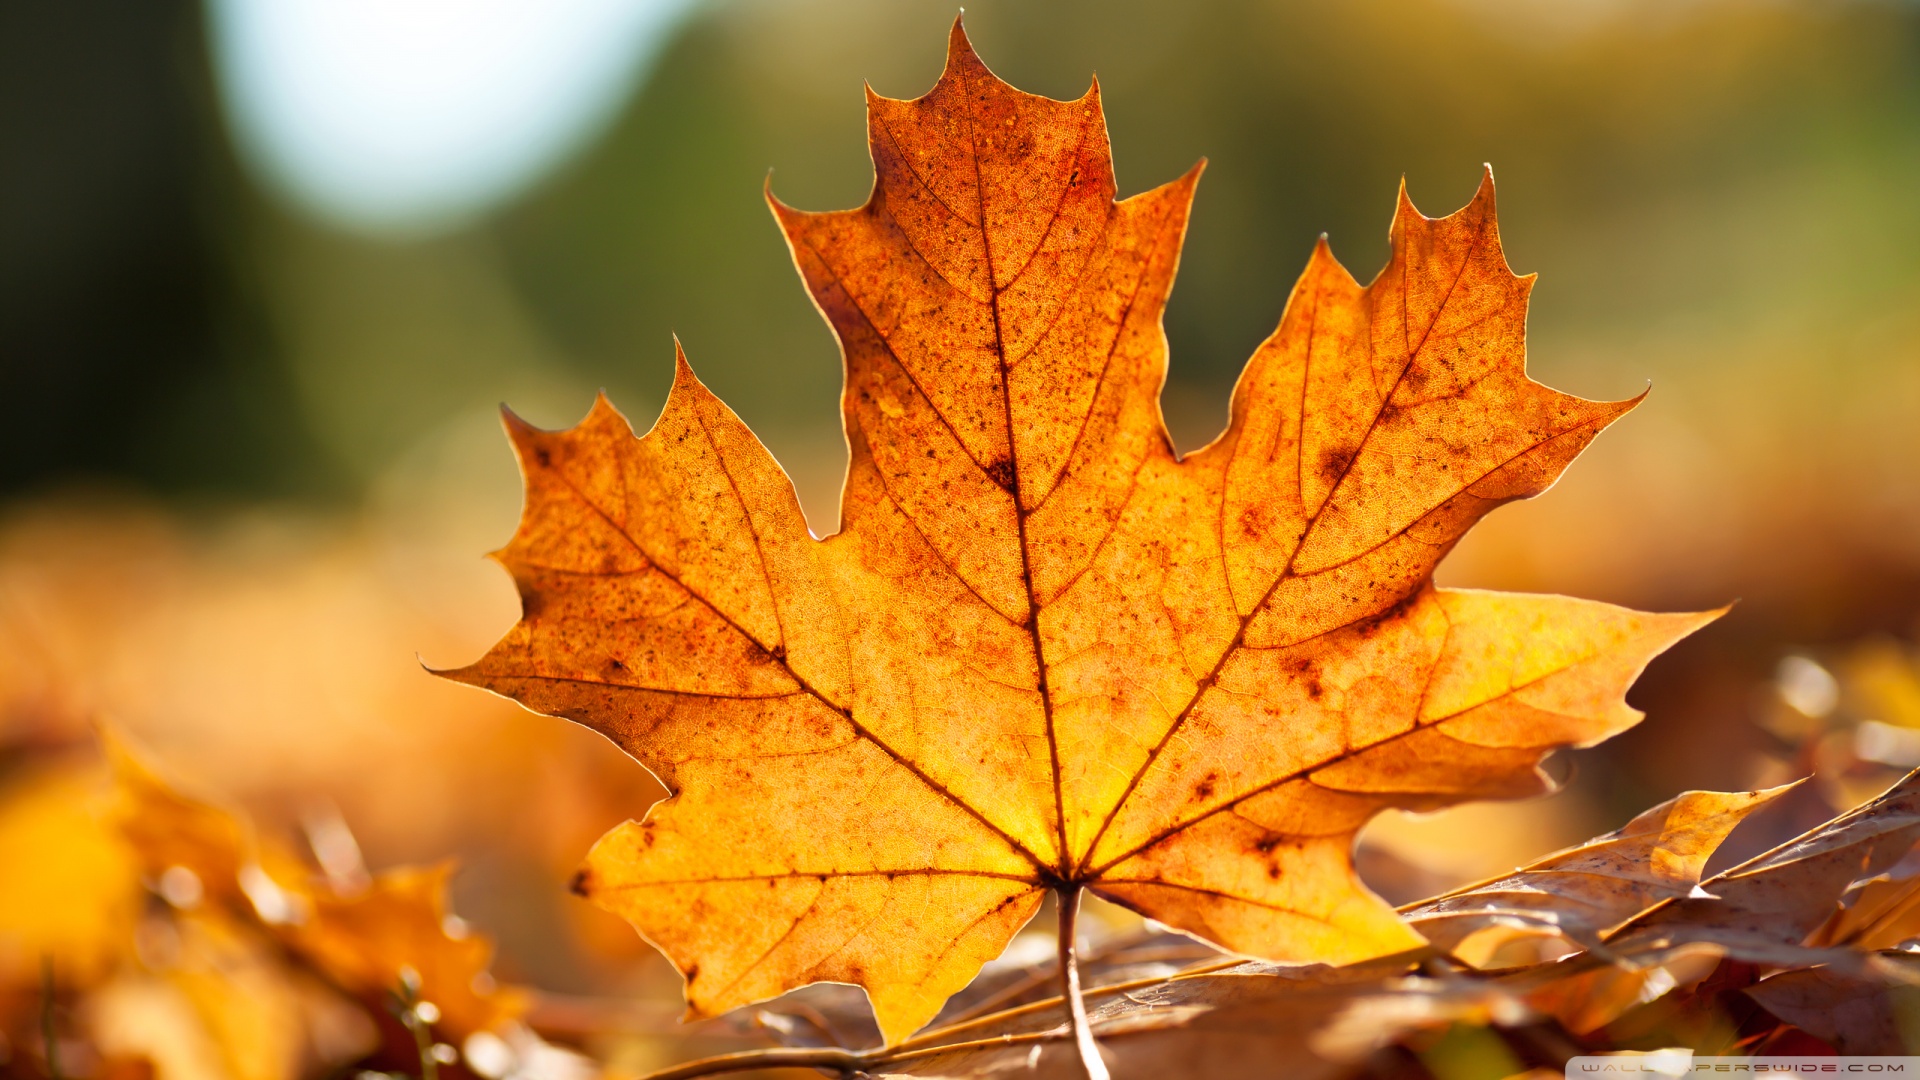 Autumn Maple Leaves And Their Beauty In These Wallpaper Are HD